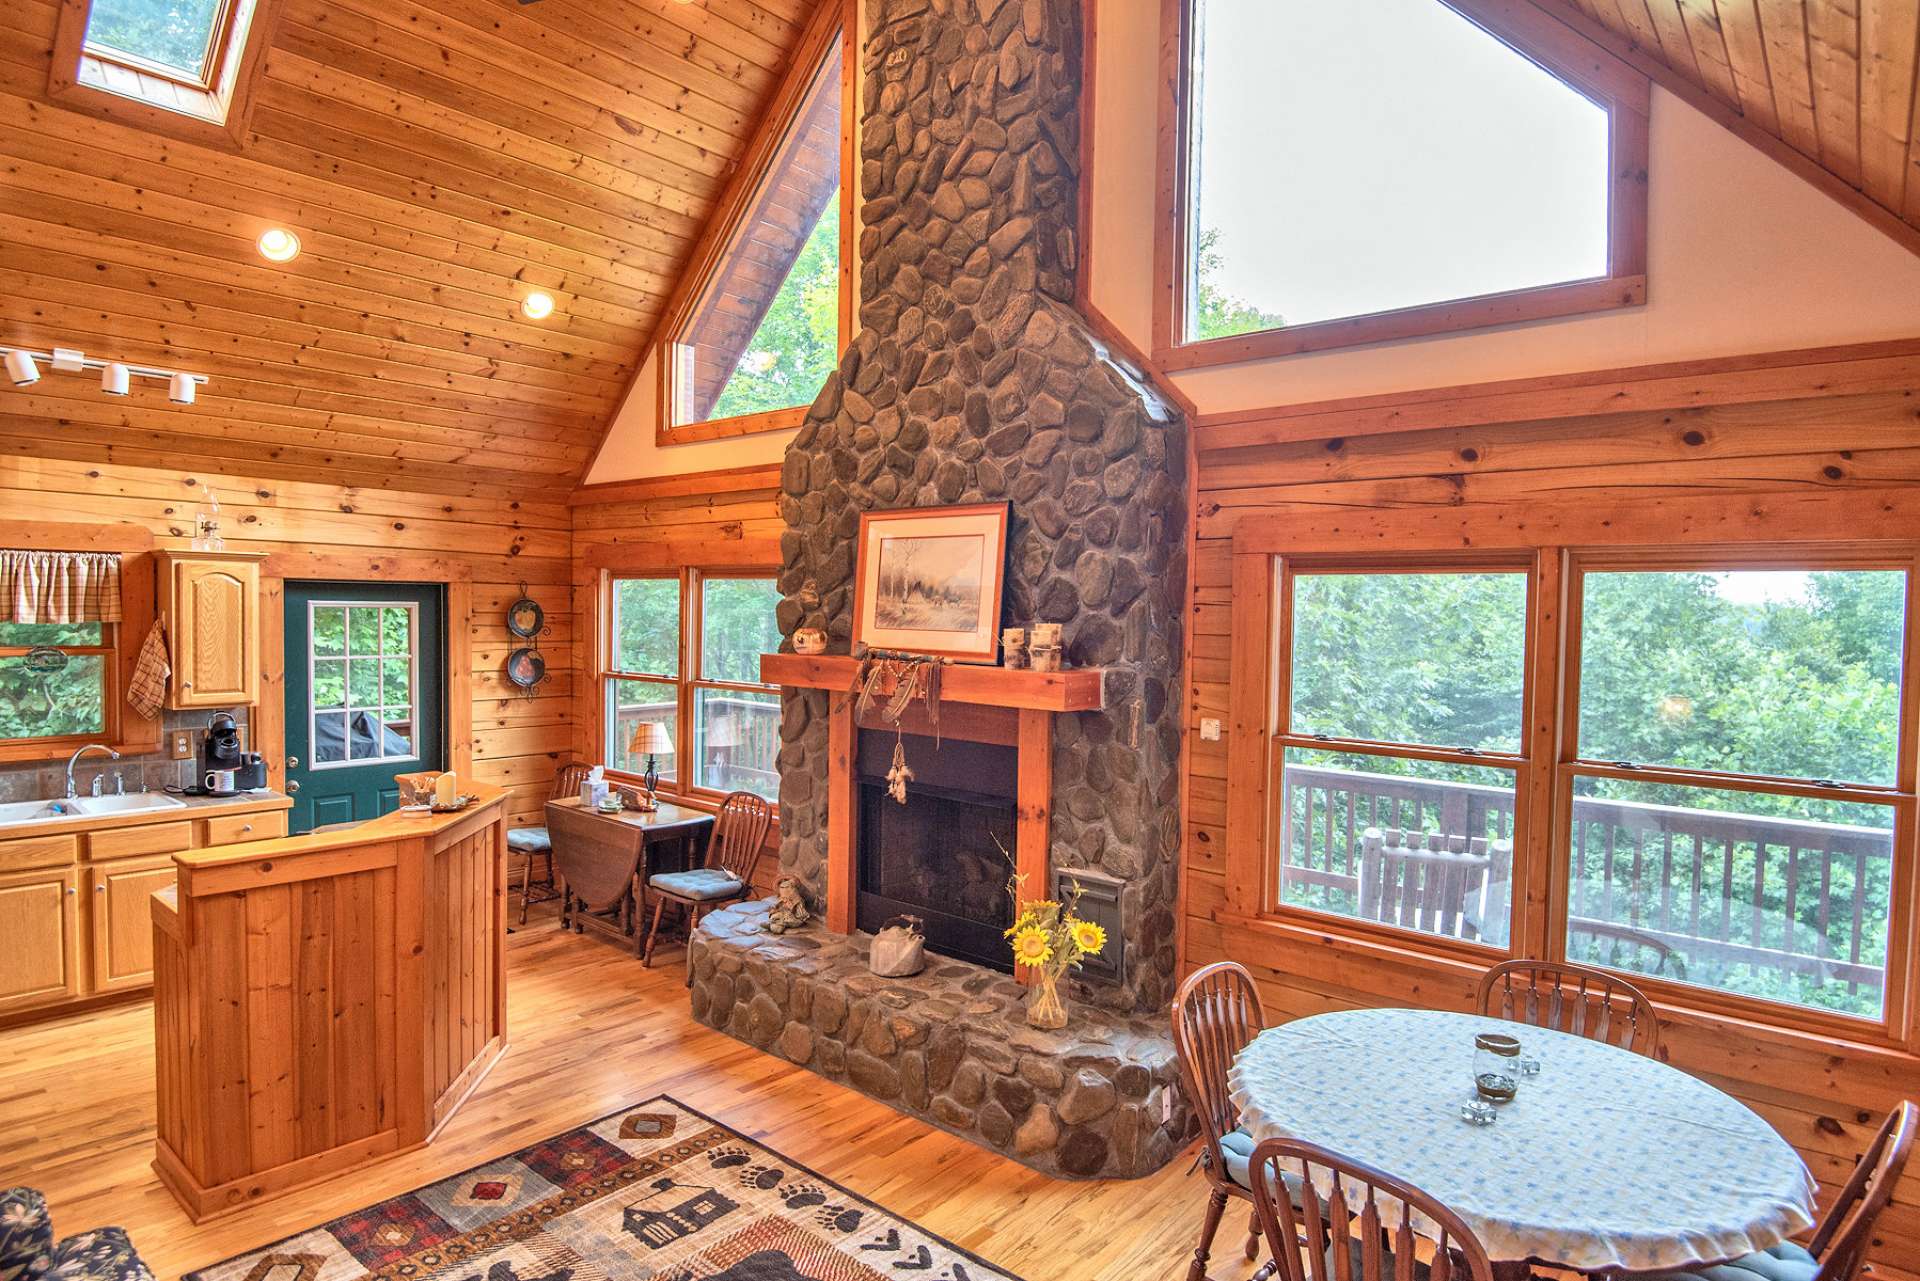 Welcoming you home, this native Ashe County river rock fireplace features easy care gas logs and a stunning heavy beamed mantle.